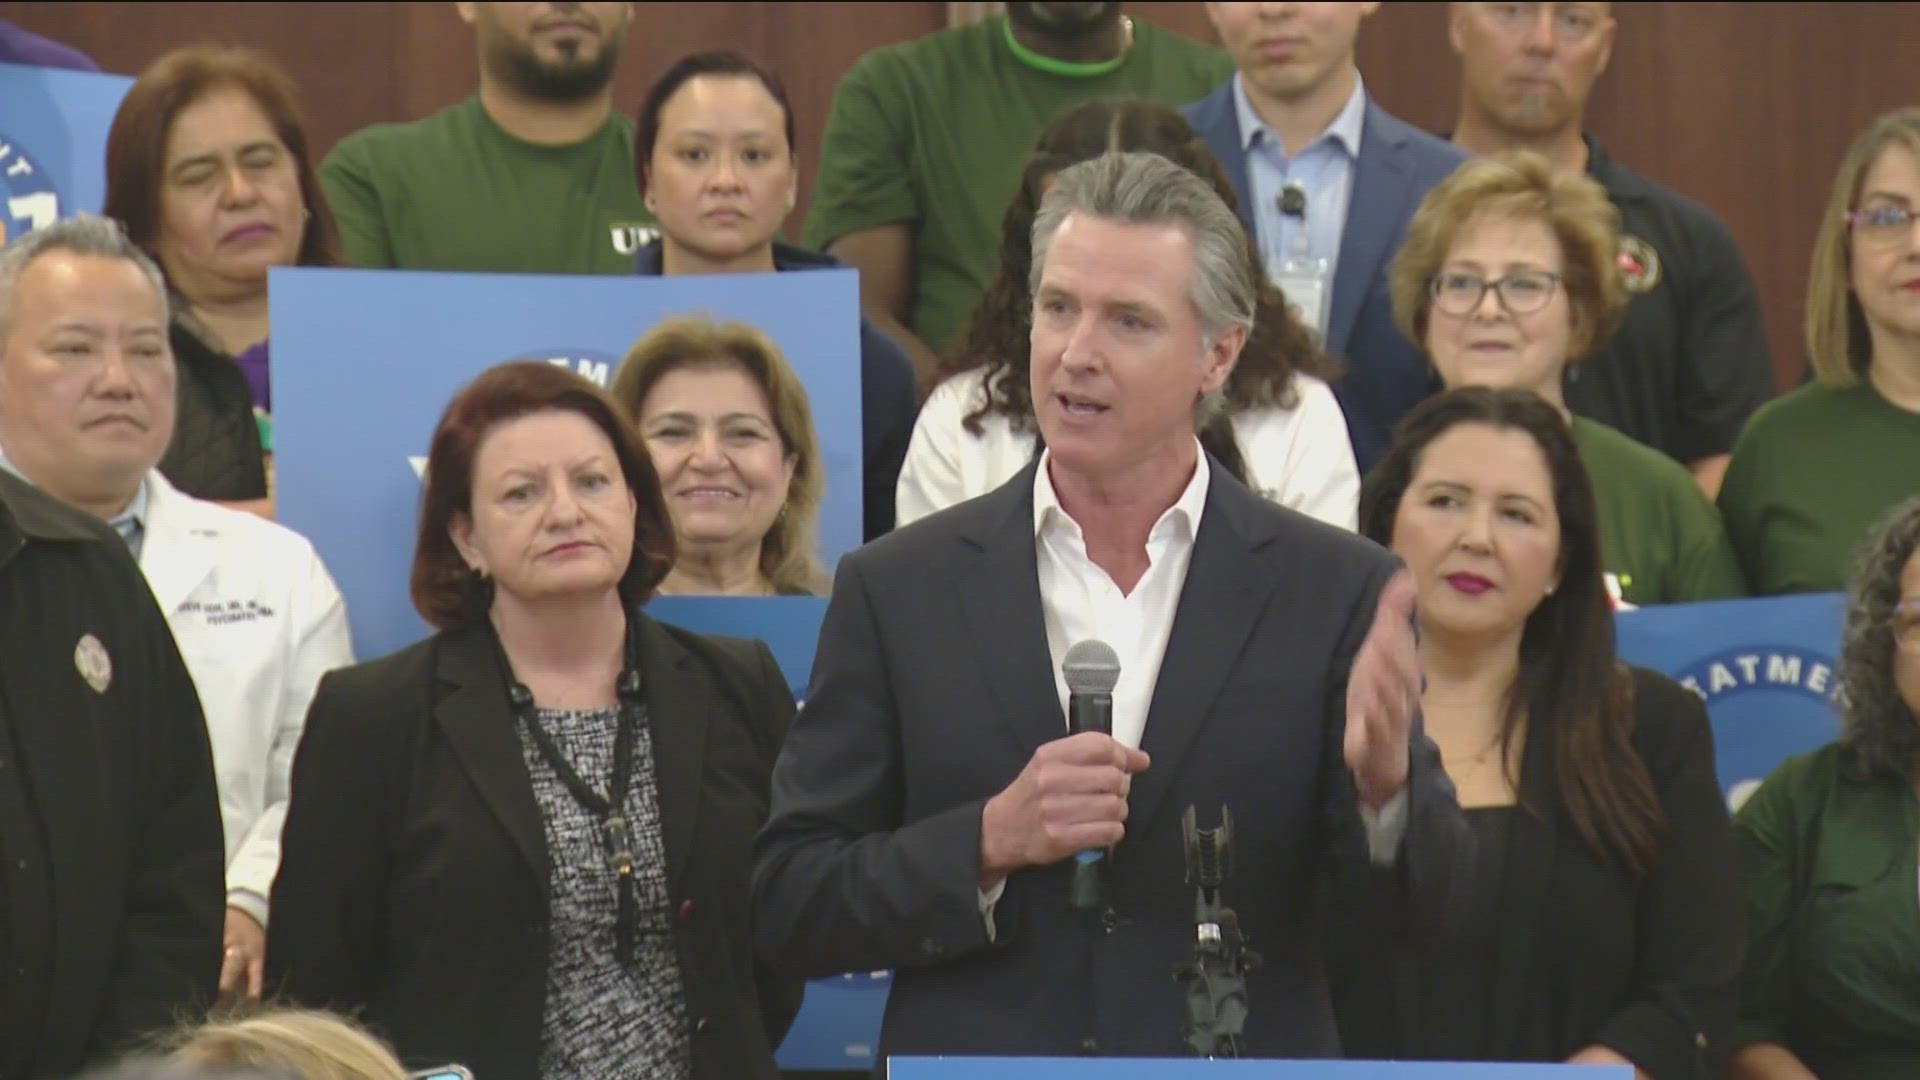 CA Governor Newsom was joined by several local leaders including San Diego Mayor Todd Gloria and County Chair Nora Vargas.